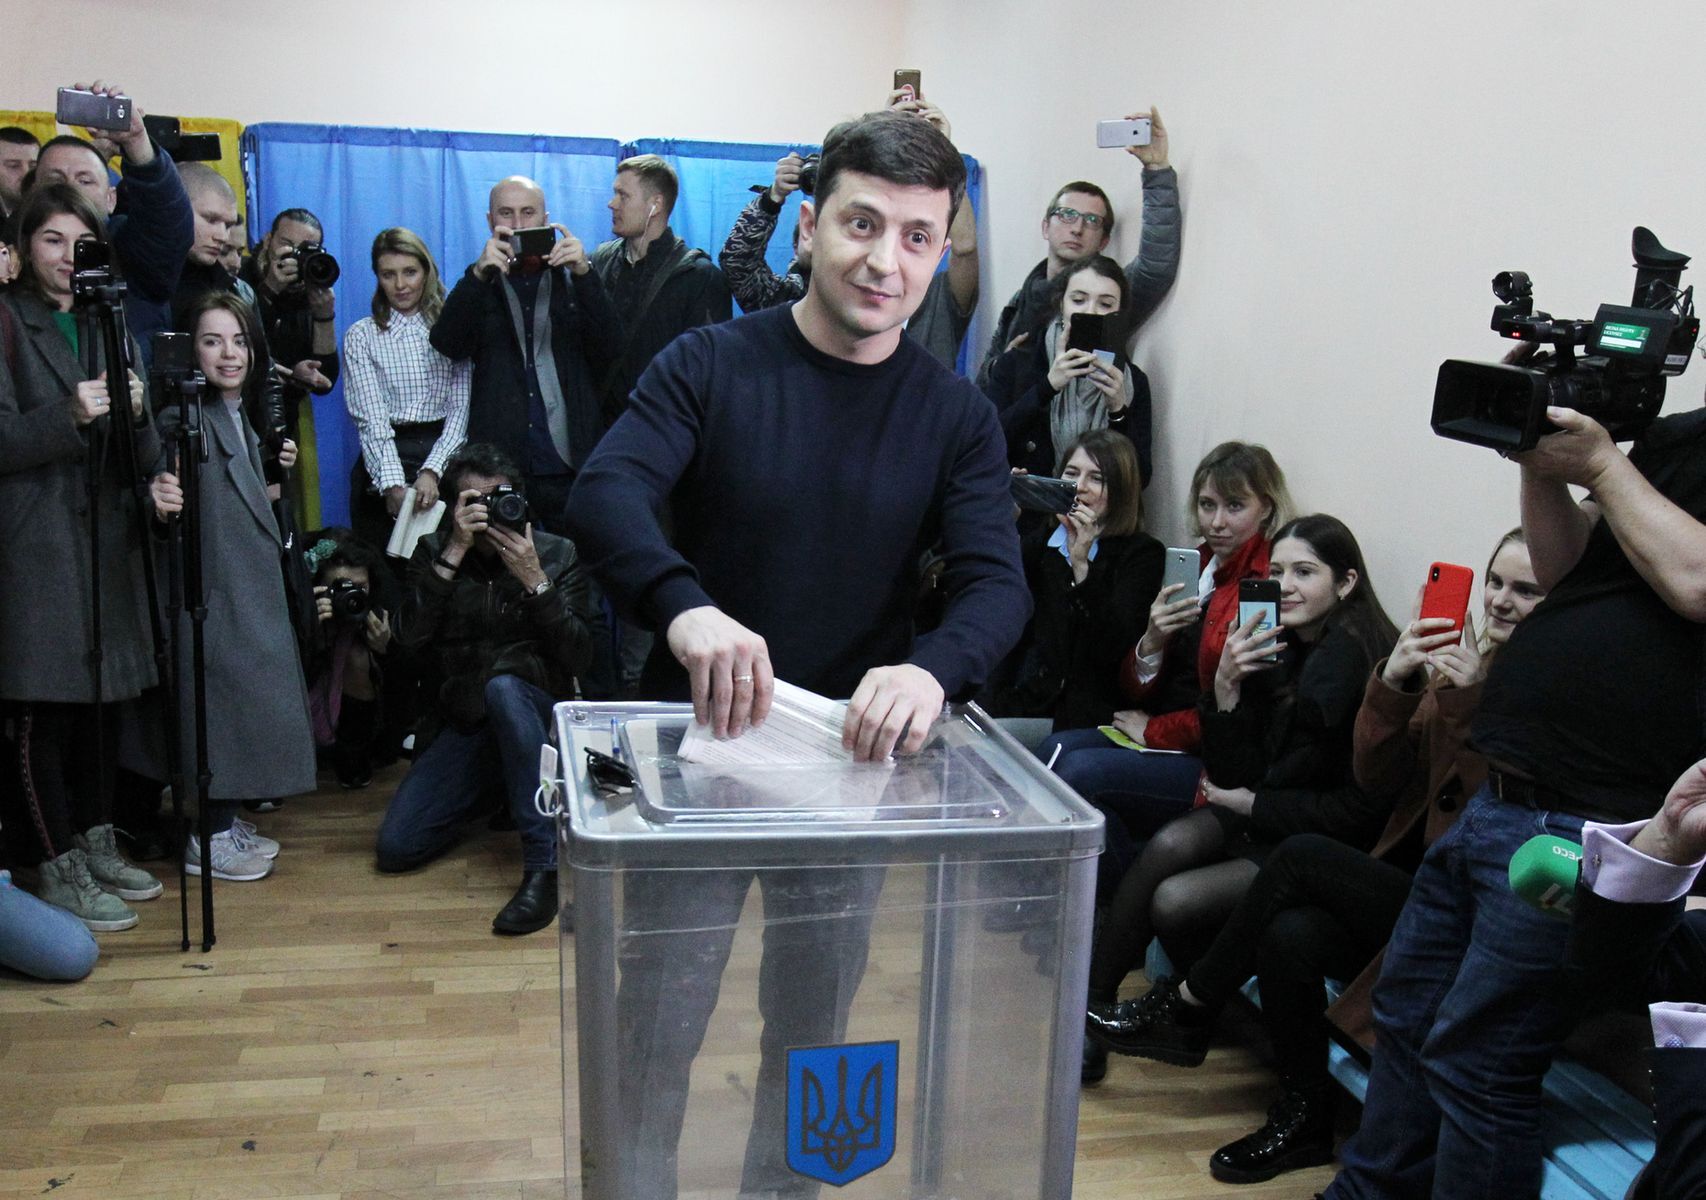 <p>In March 2019, Volodymyr Zelensky cast a ballot for himself as the next president of Ukraine. The political novice was up against 39 other candidates in the first round of voting, including former Ukraine president and billionaire <a href="https://www.britannica.com/biography/Petro-Poroshenko">Petro Poroshenko</a>.</p>